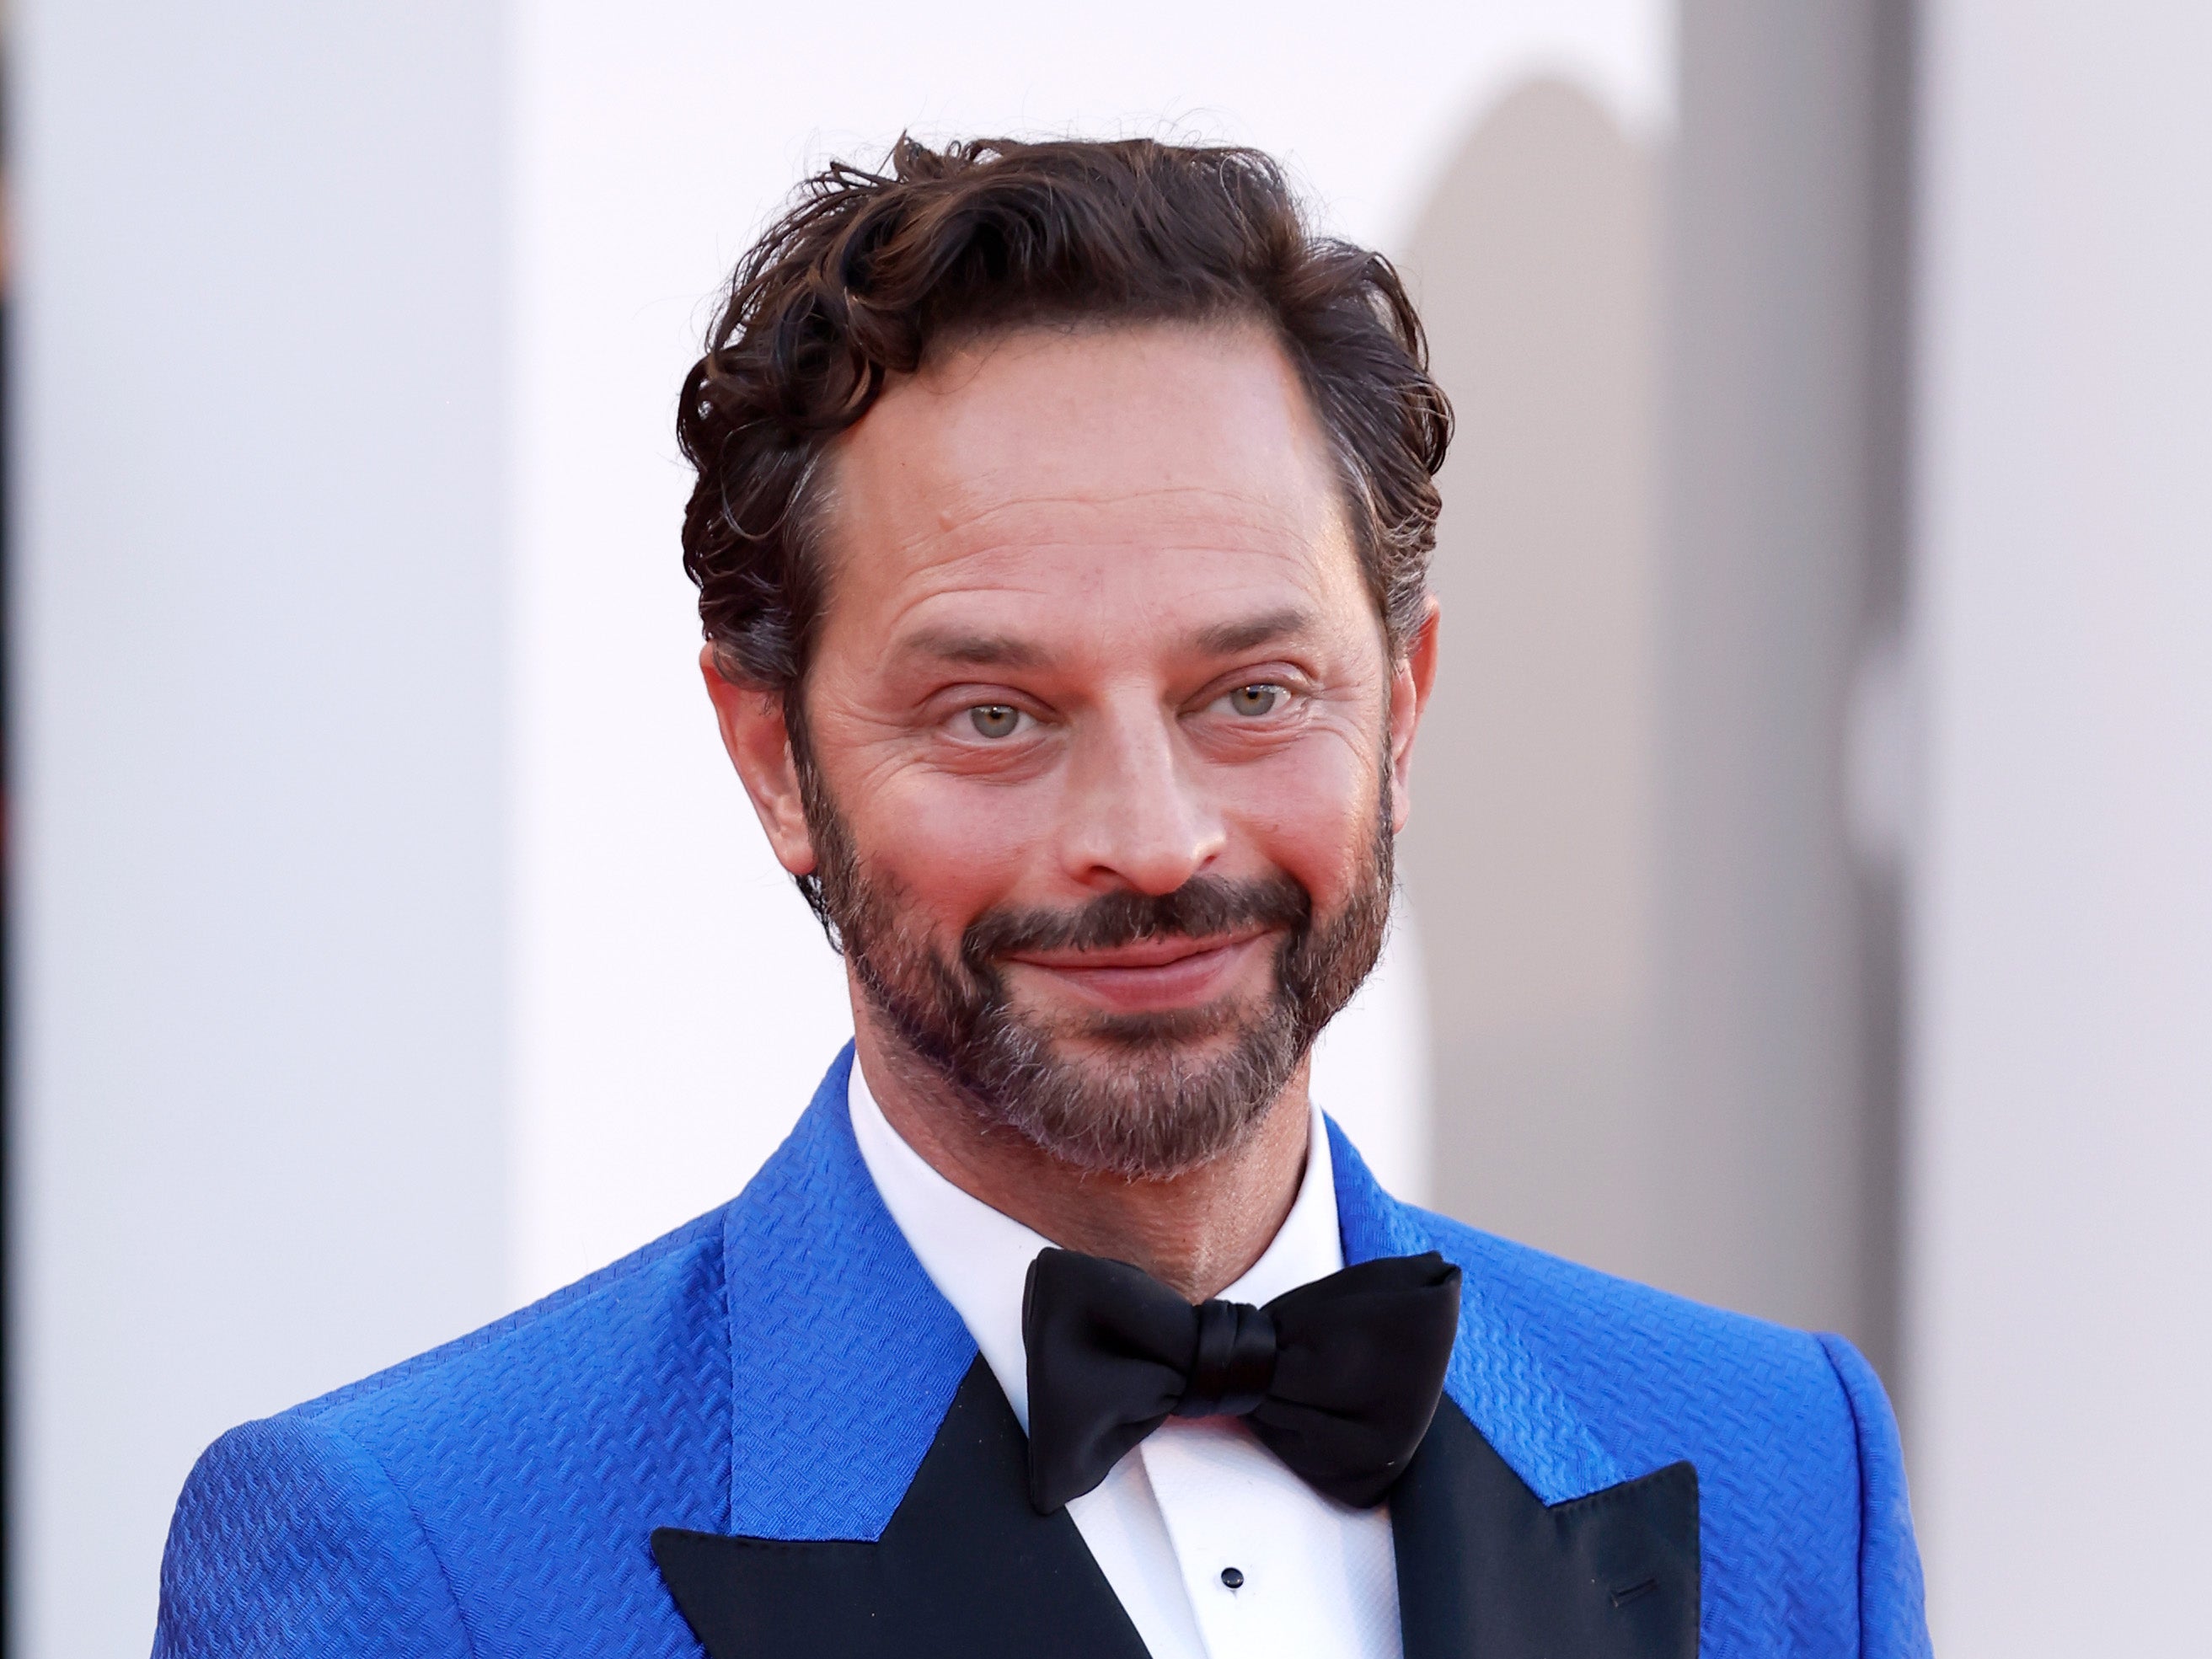 Nick Kroll attends the ‘Don't Worry Darling’ red carpet